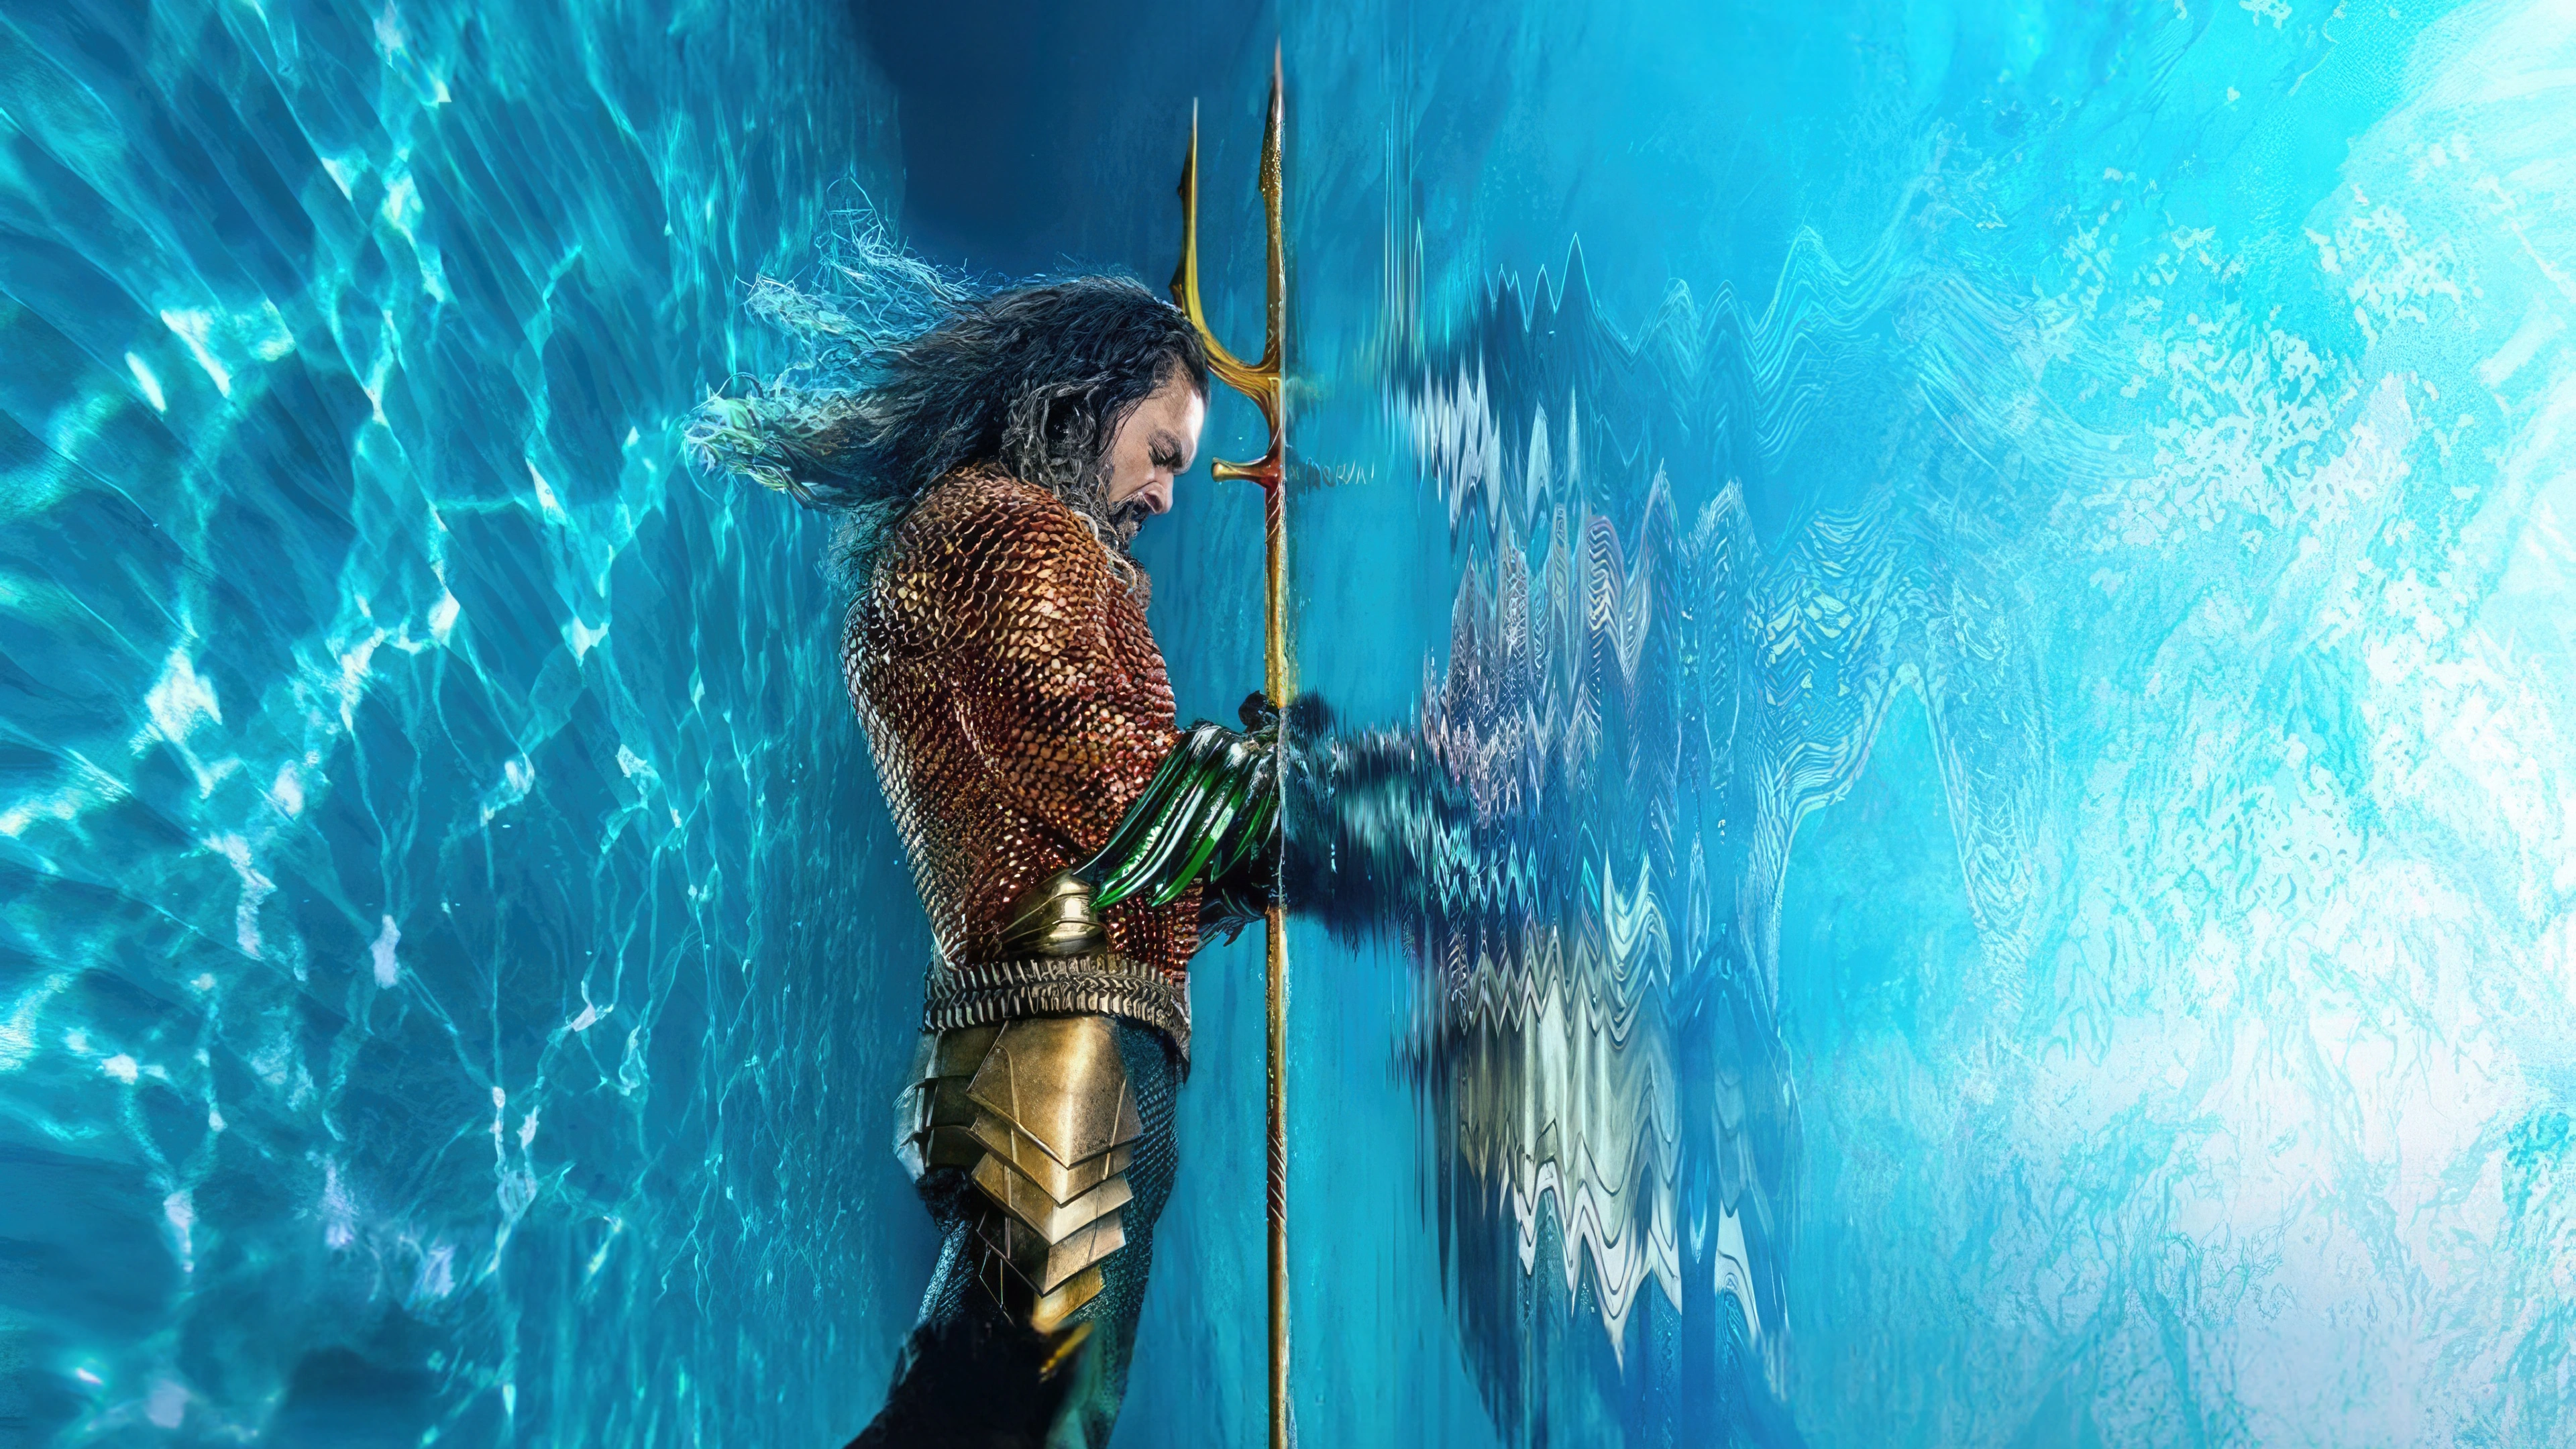 aquaman and the lost kingdom between land and sea s4.jpg